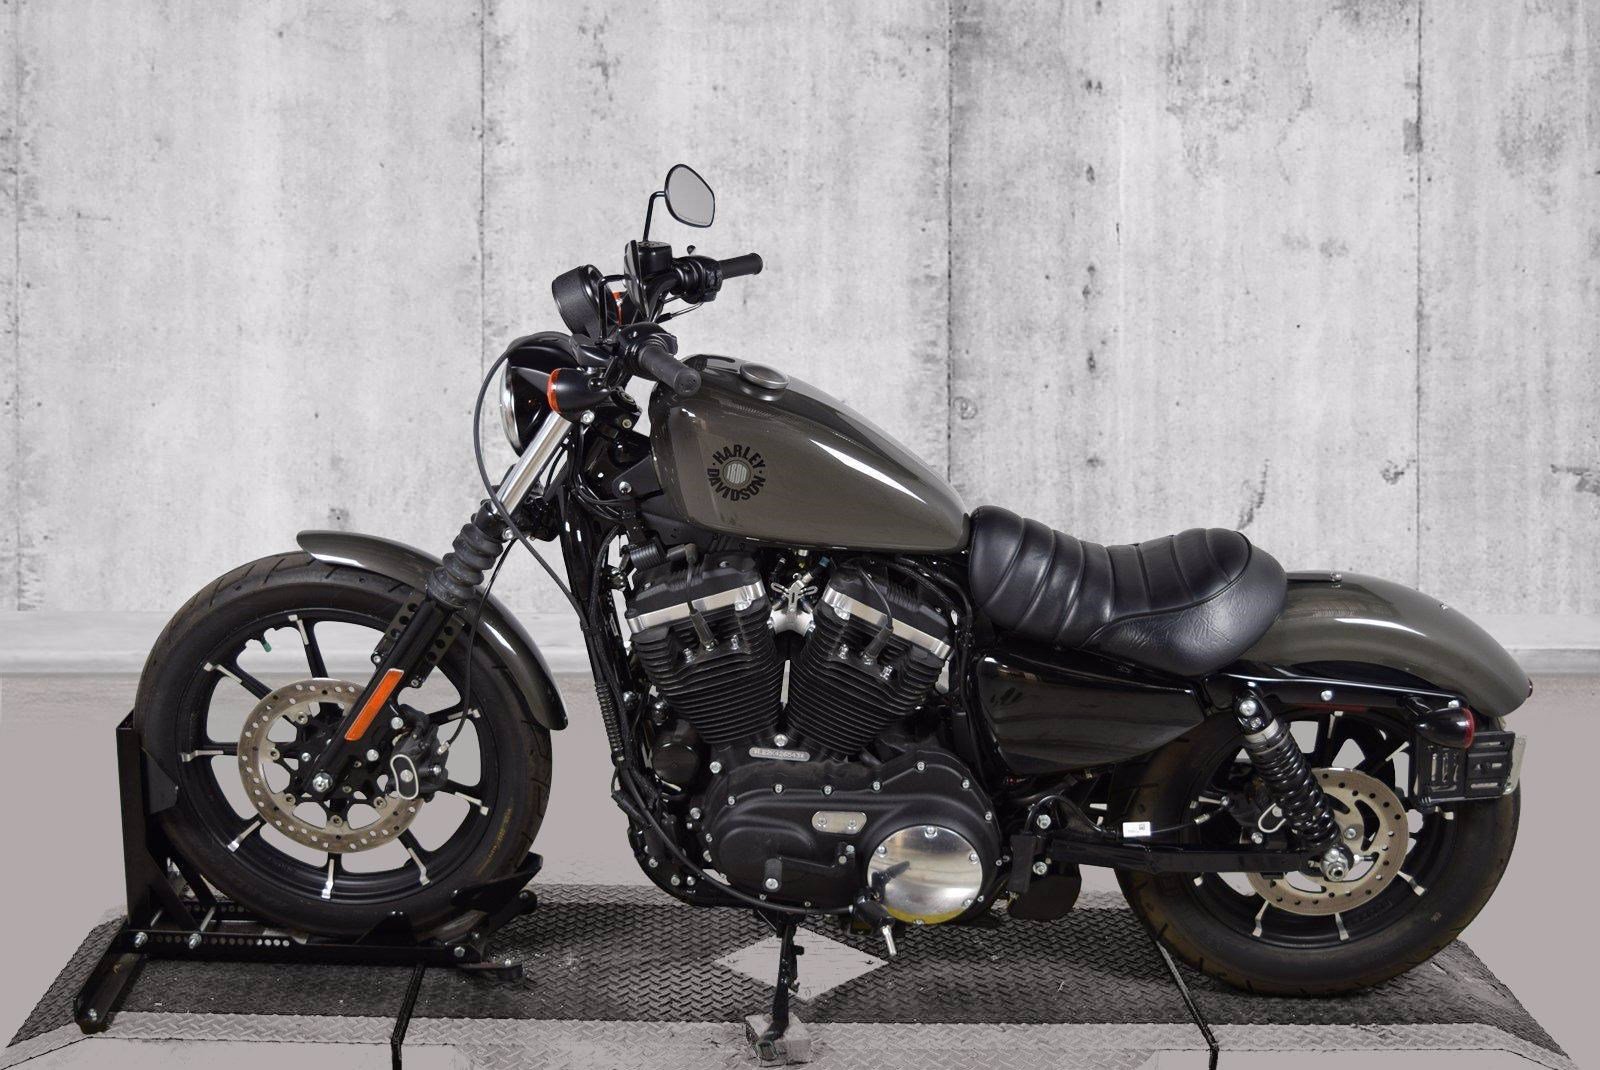 Pre-Owned 2019 Harley-Davidson Sportster Iron 883 XL883N Sportster in